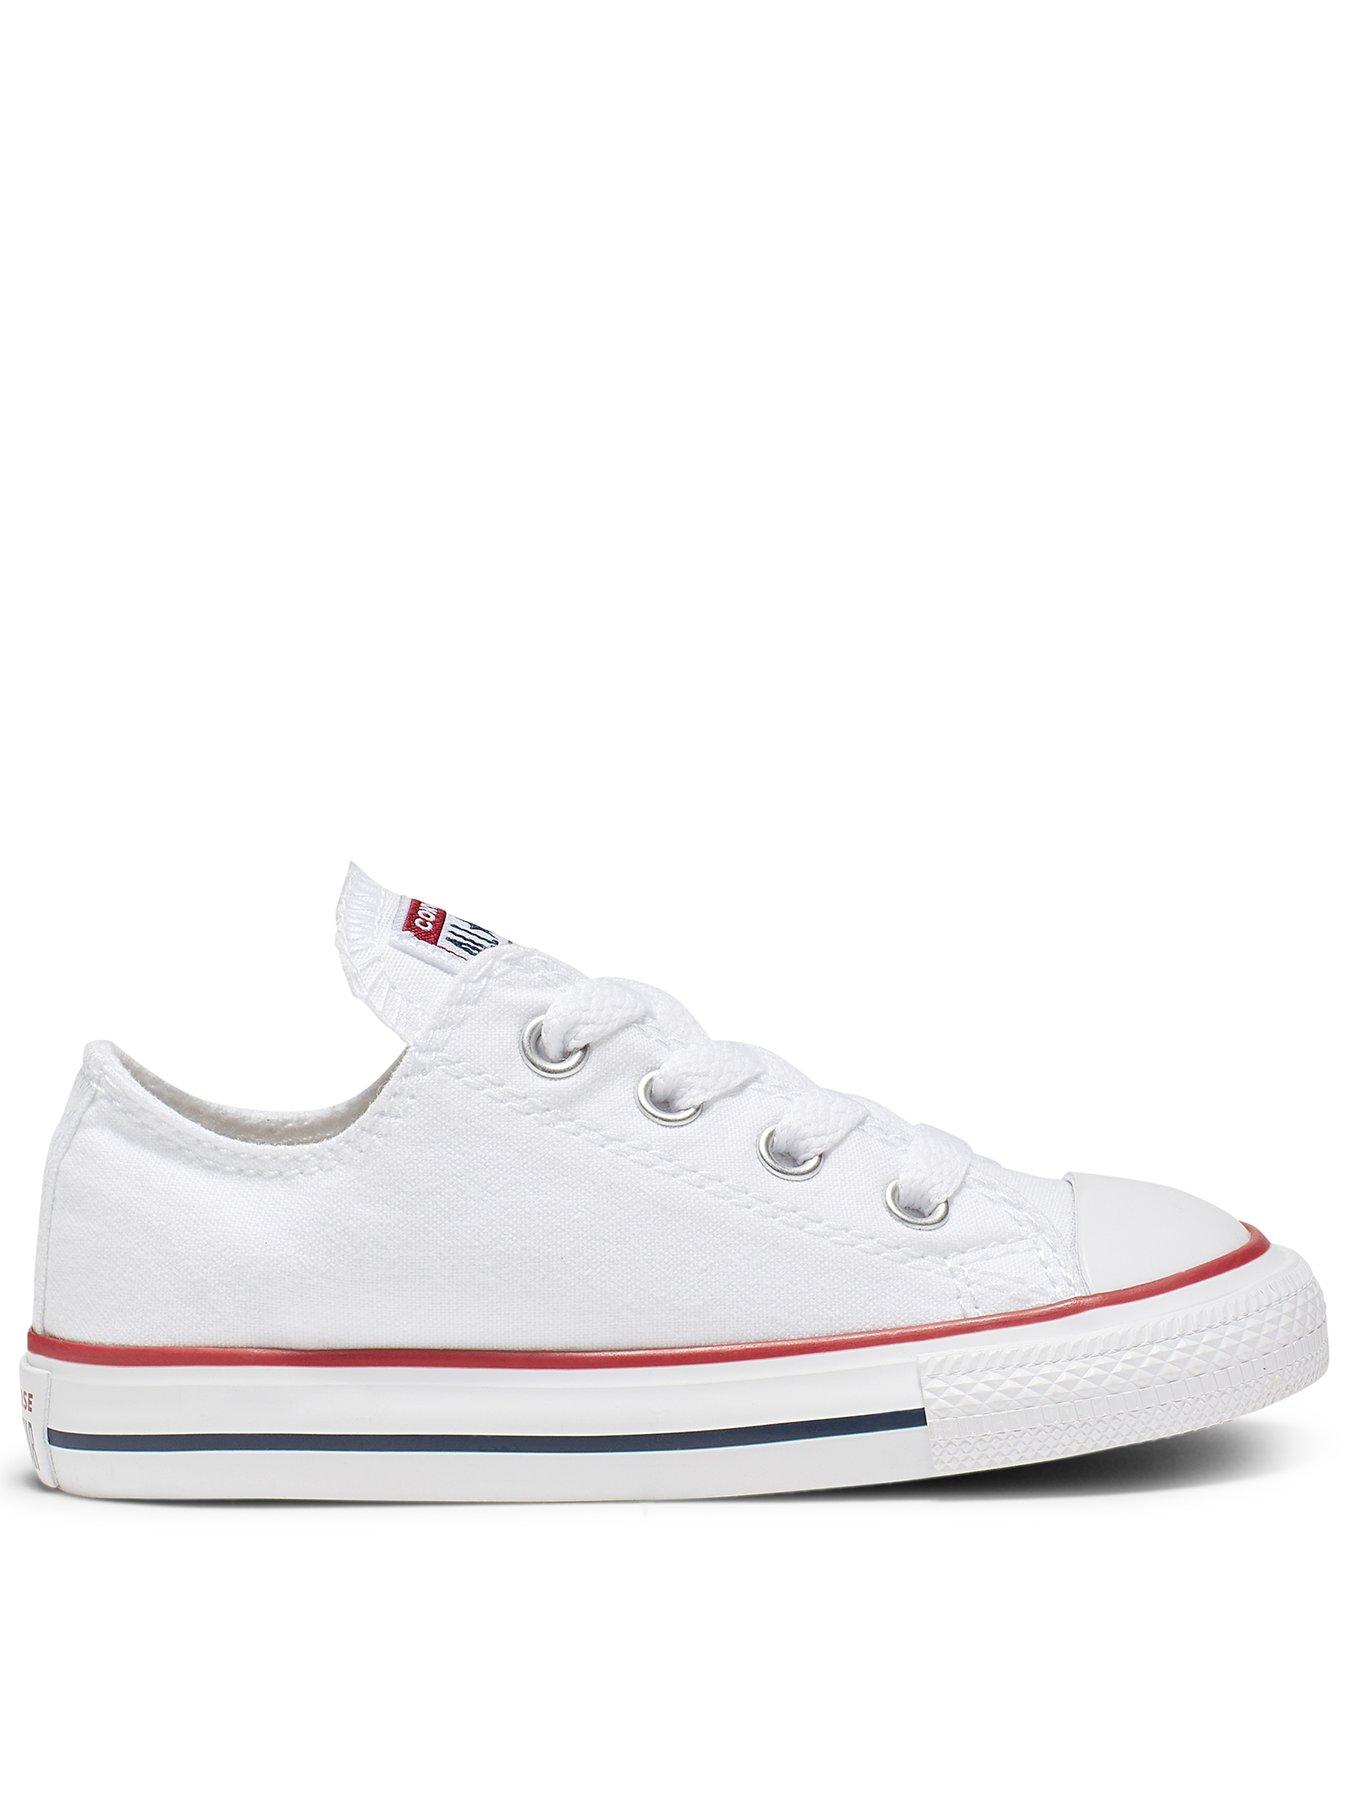 Converse Chuck Taylor All Star Seasonal Infant Trainer - White |  littlewoods.com